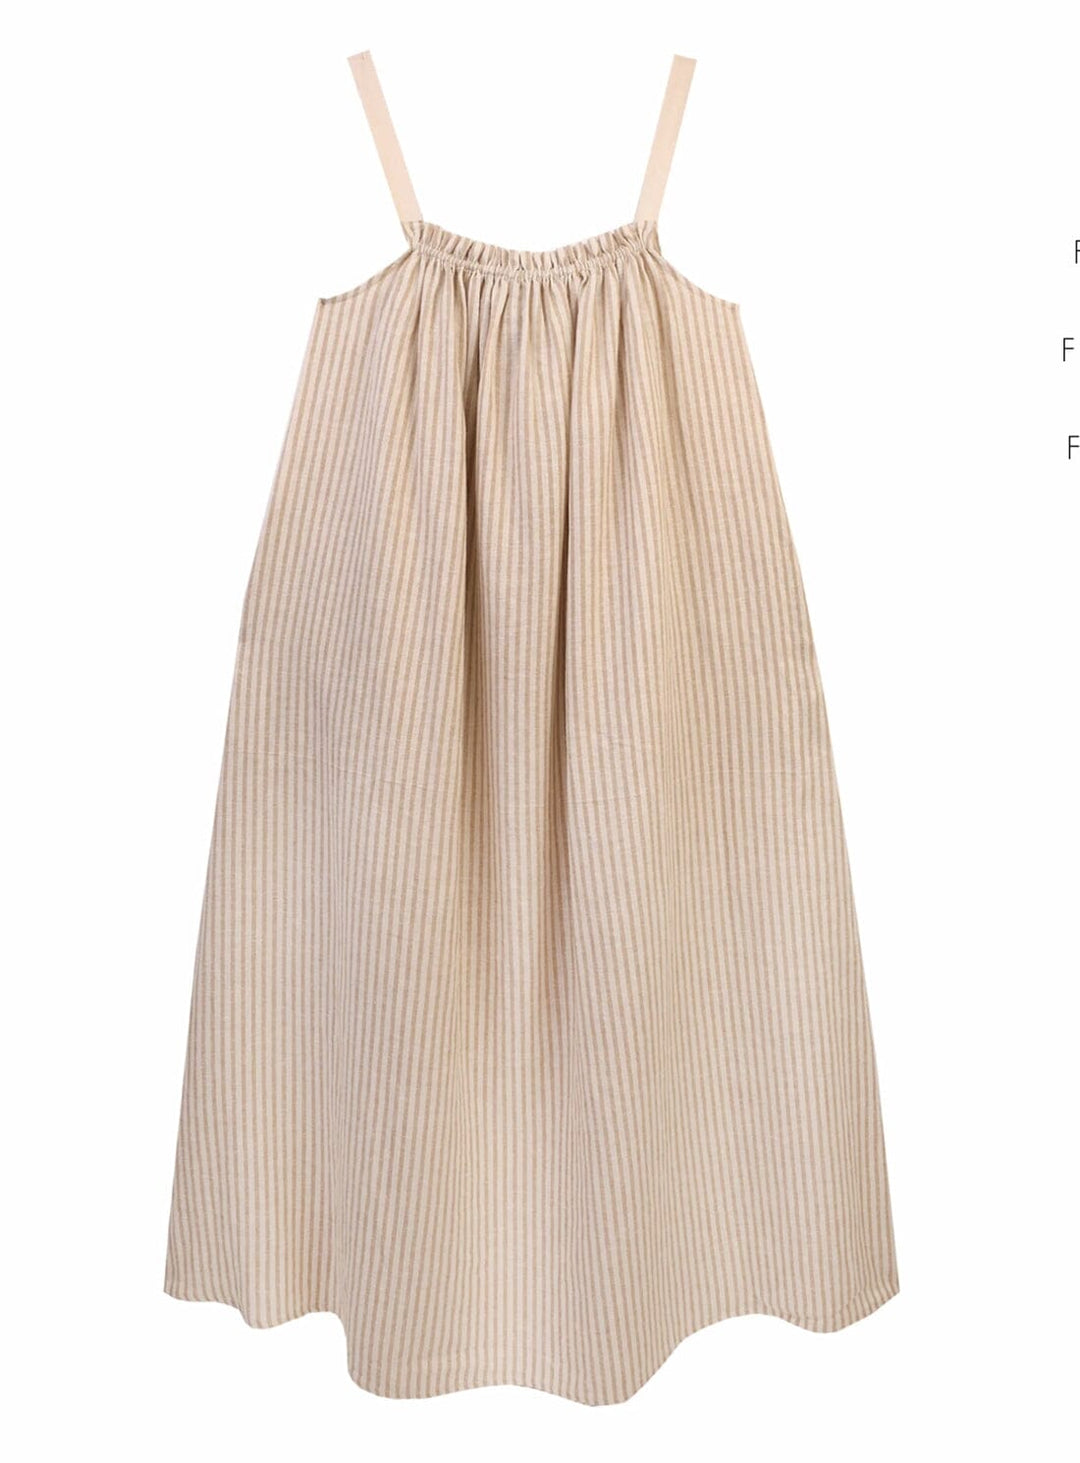 Atwood Dress in Almond Stripe Dresses YBDFinds 